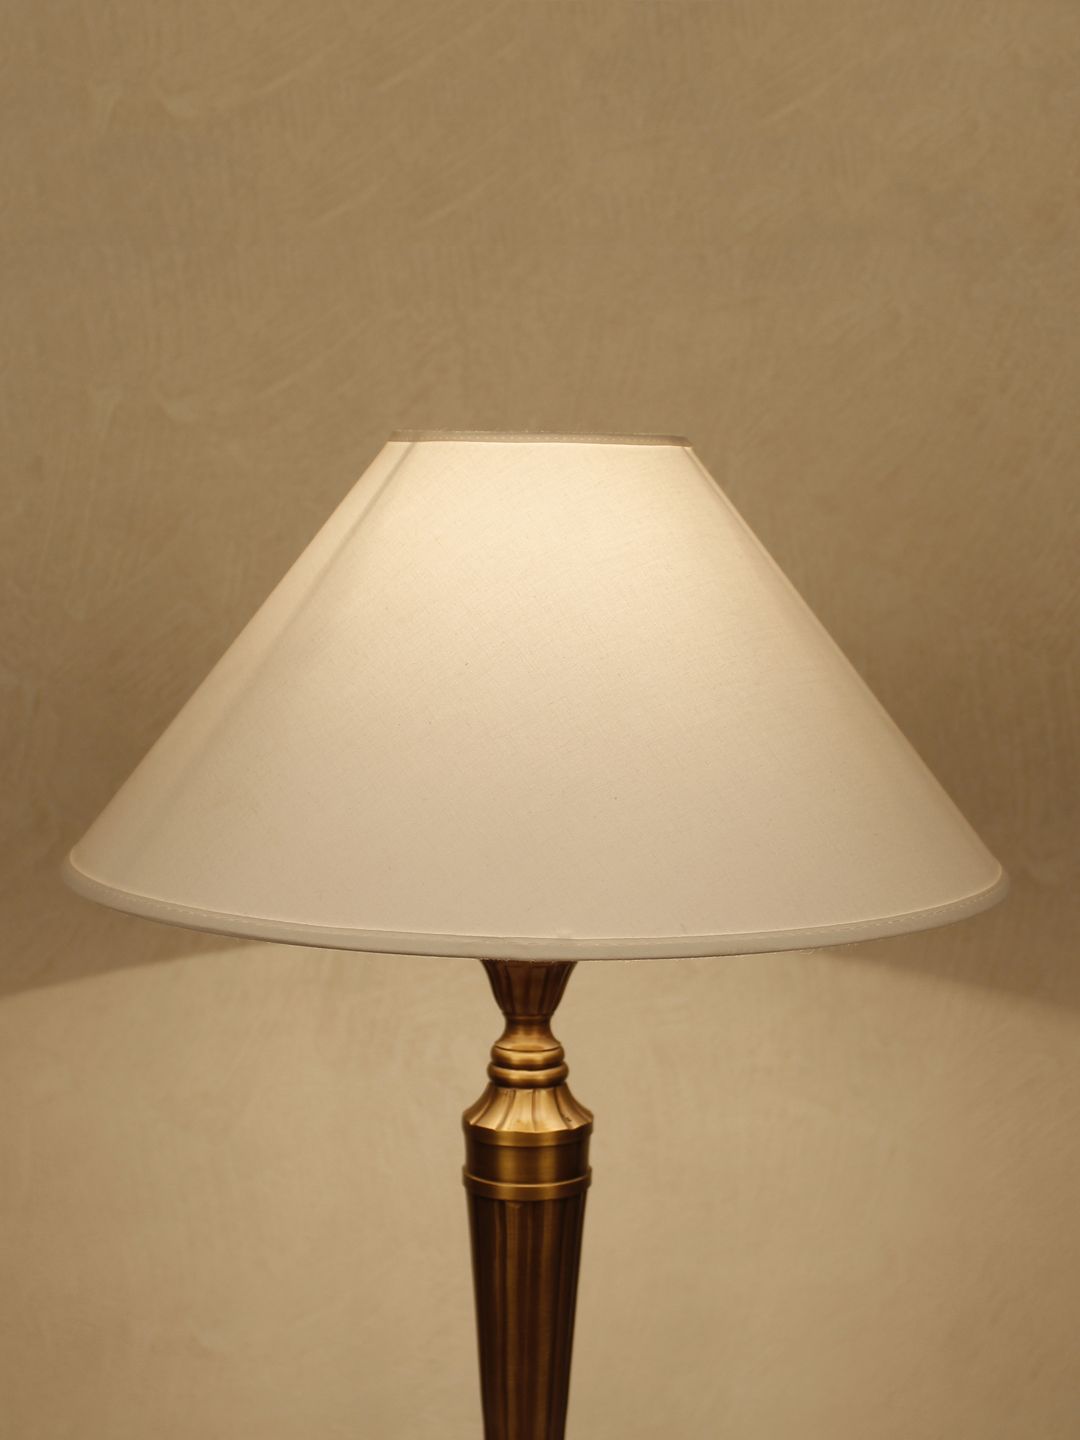 THE LIGHT STORE White Solid Contemporary Table Top Lamp Shade Price in India